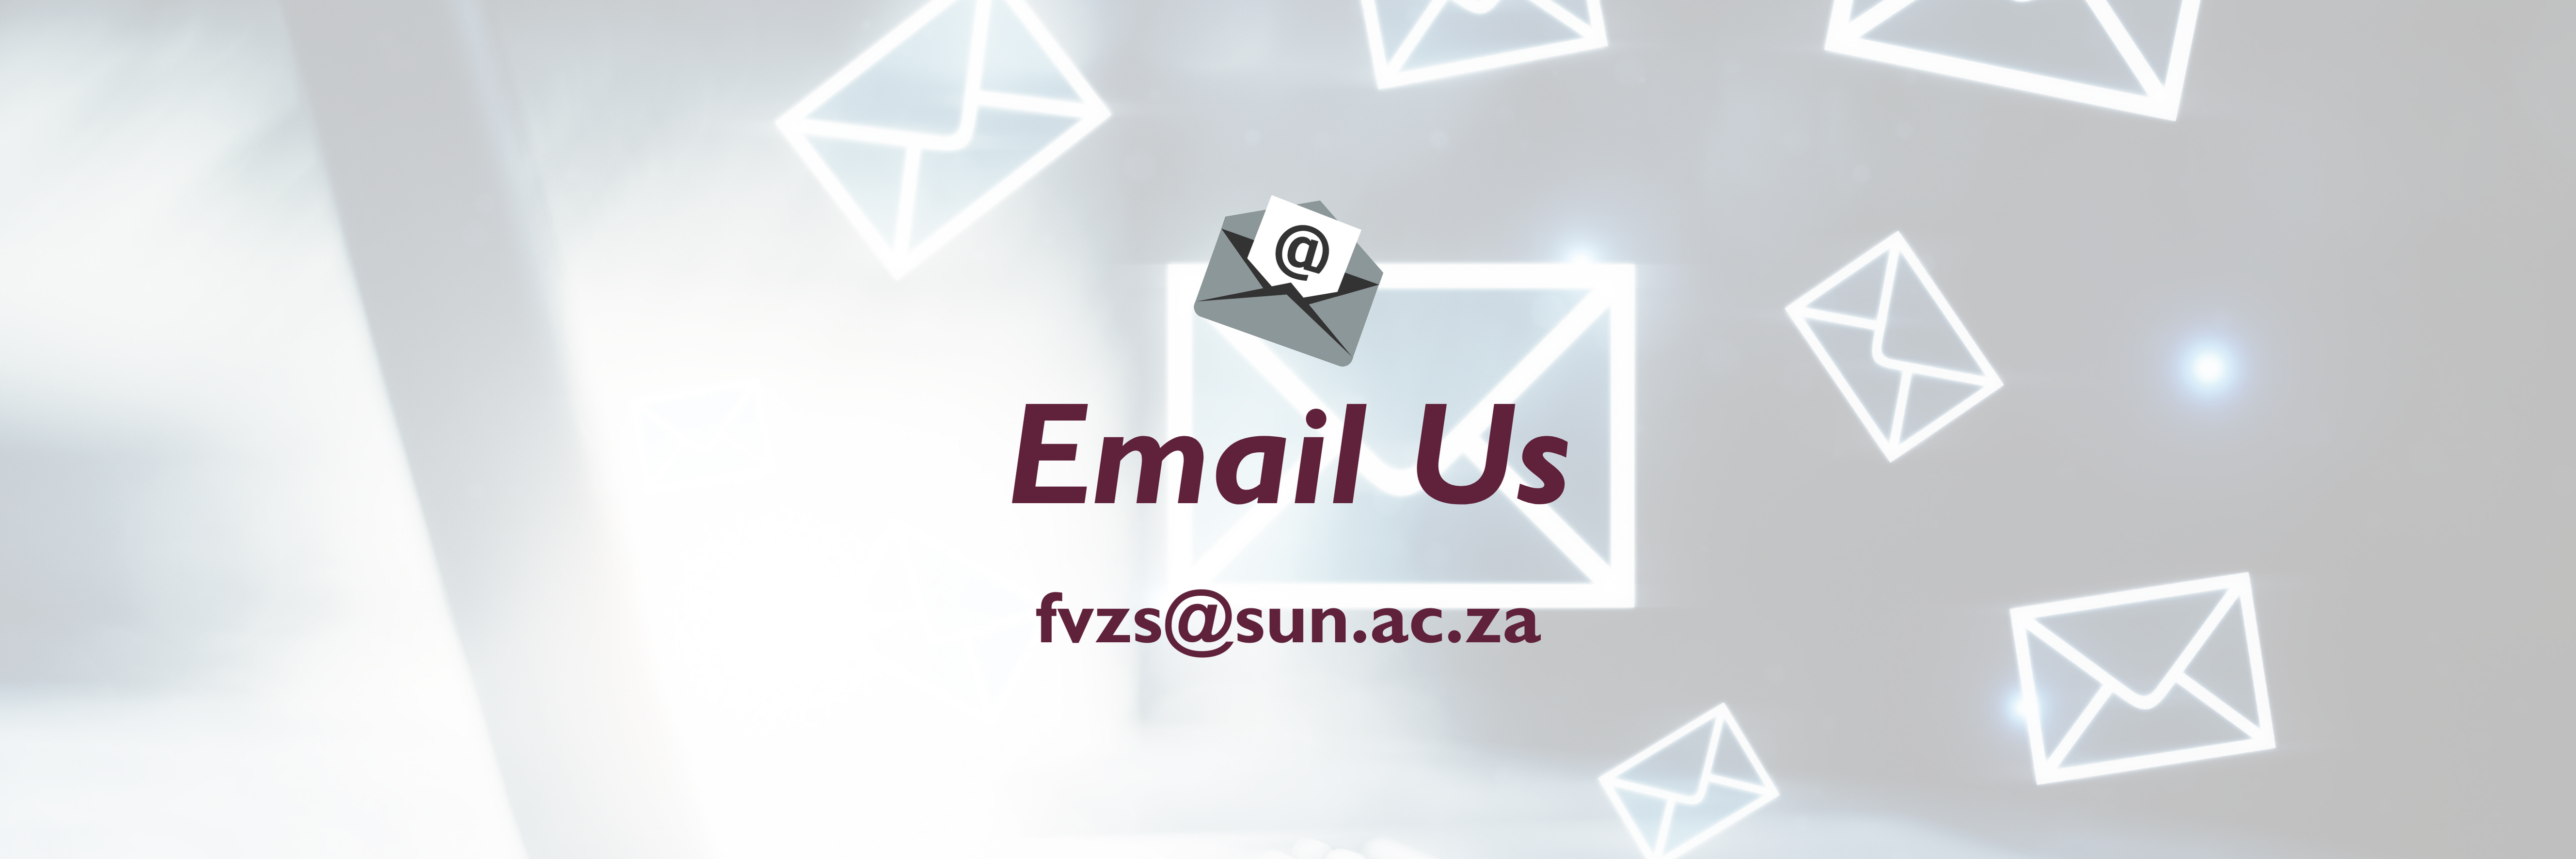 Email FVZS 2.png